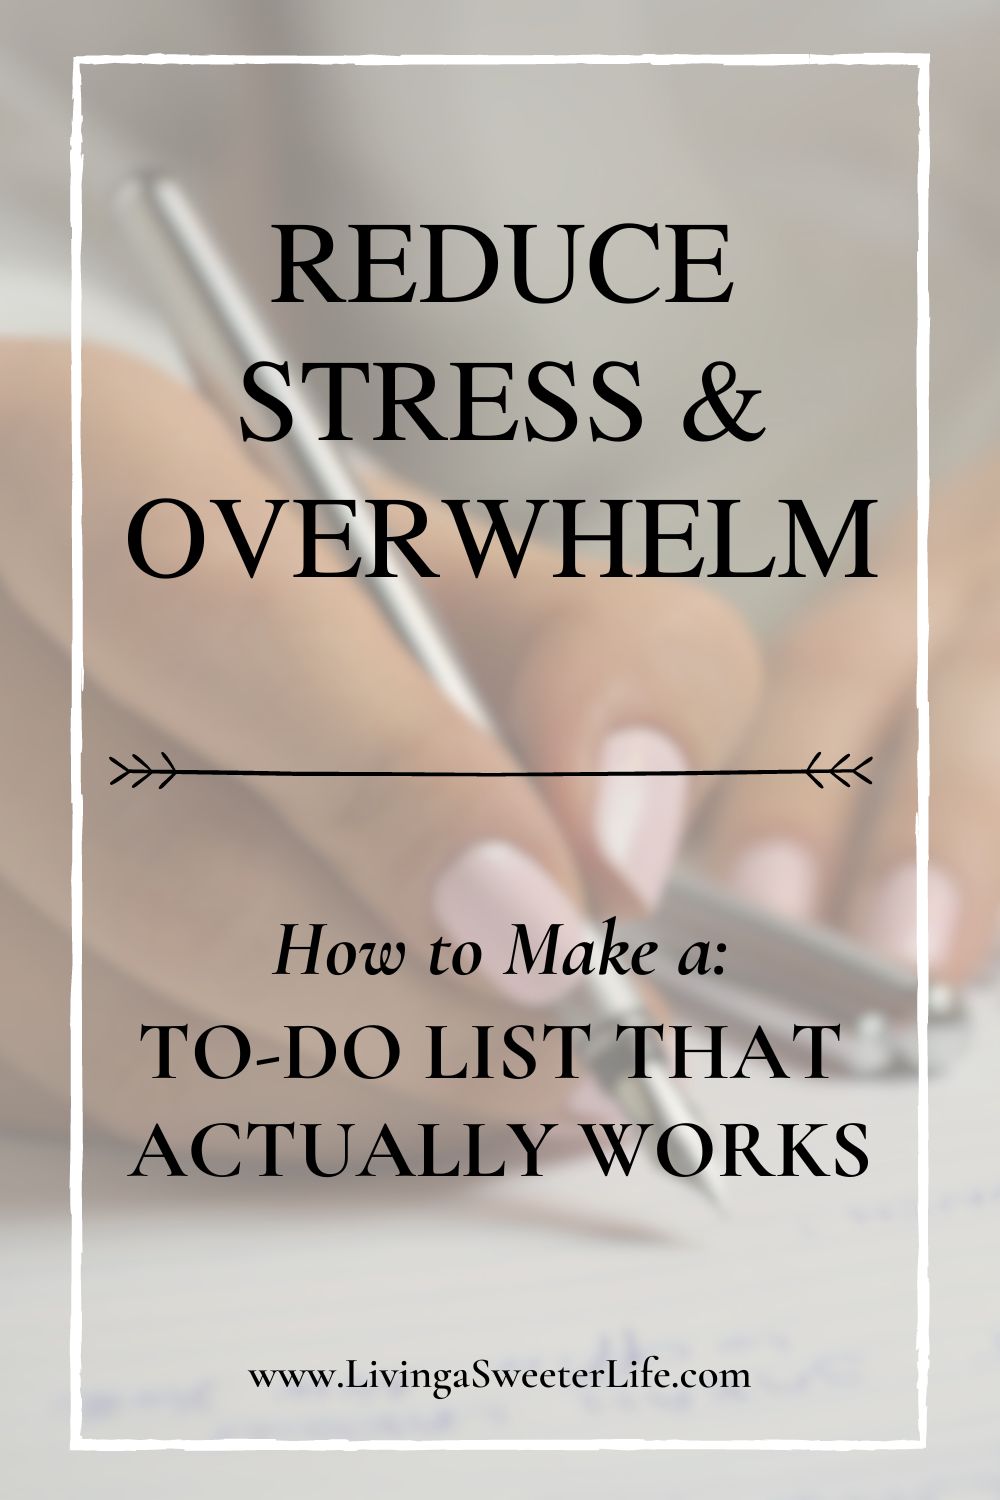 How to Make a To Do List - Are You Doing It the Right Way?